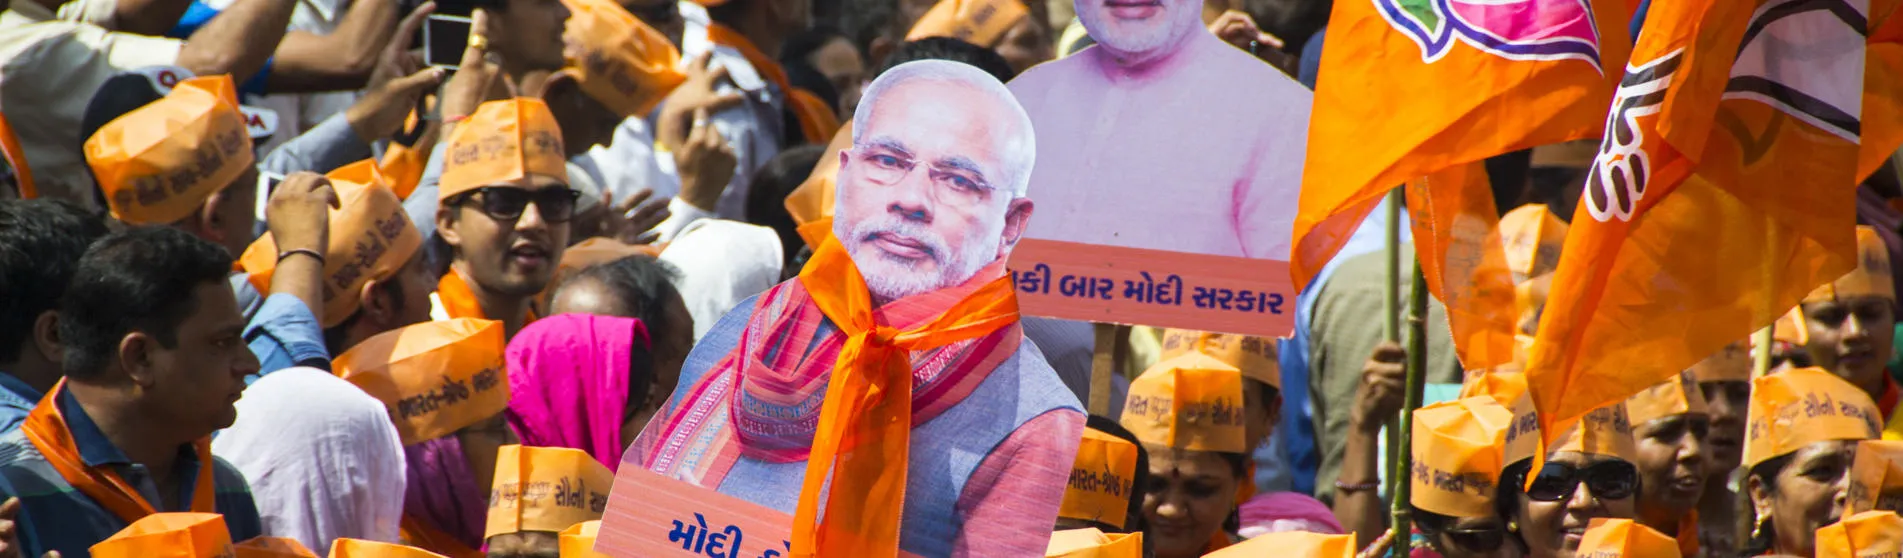 Supporters of Narendra Modi holding up banners of his image